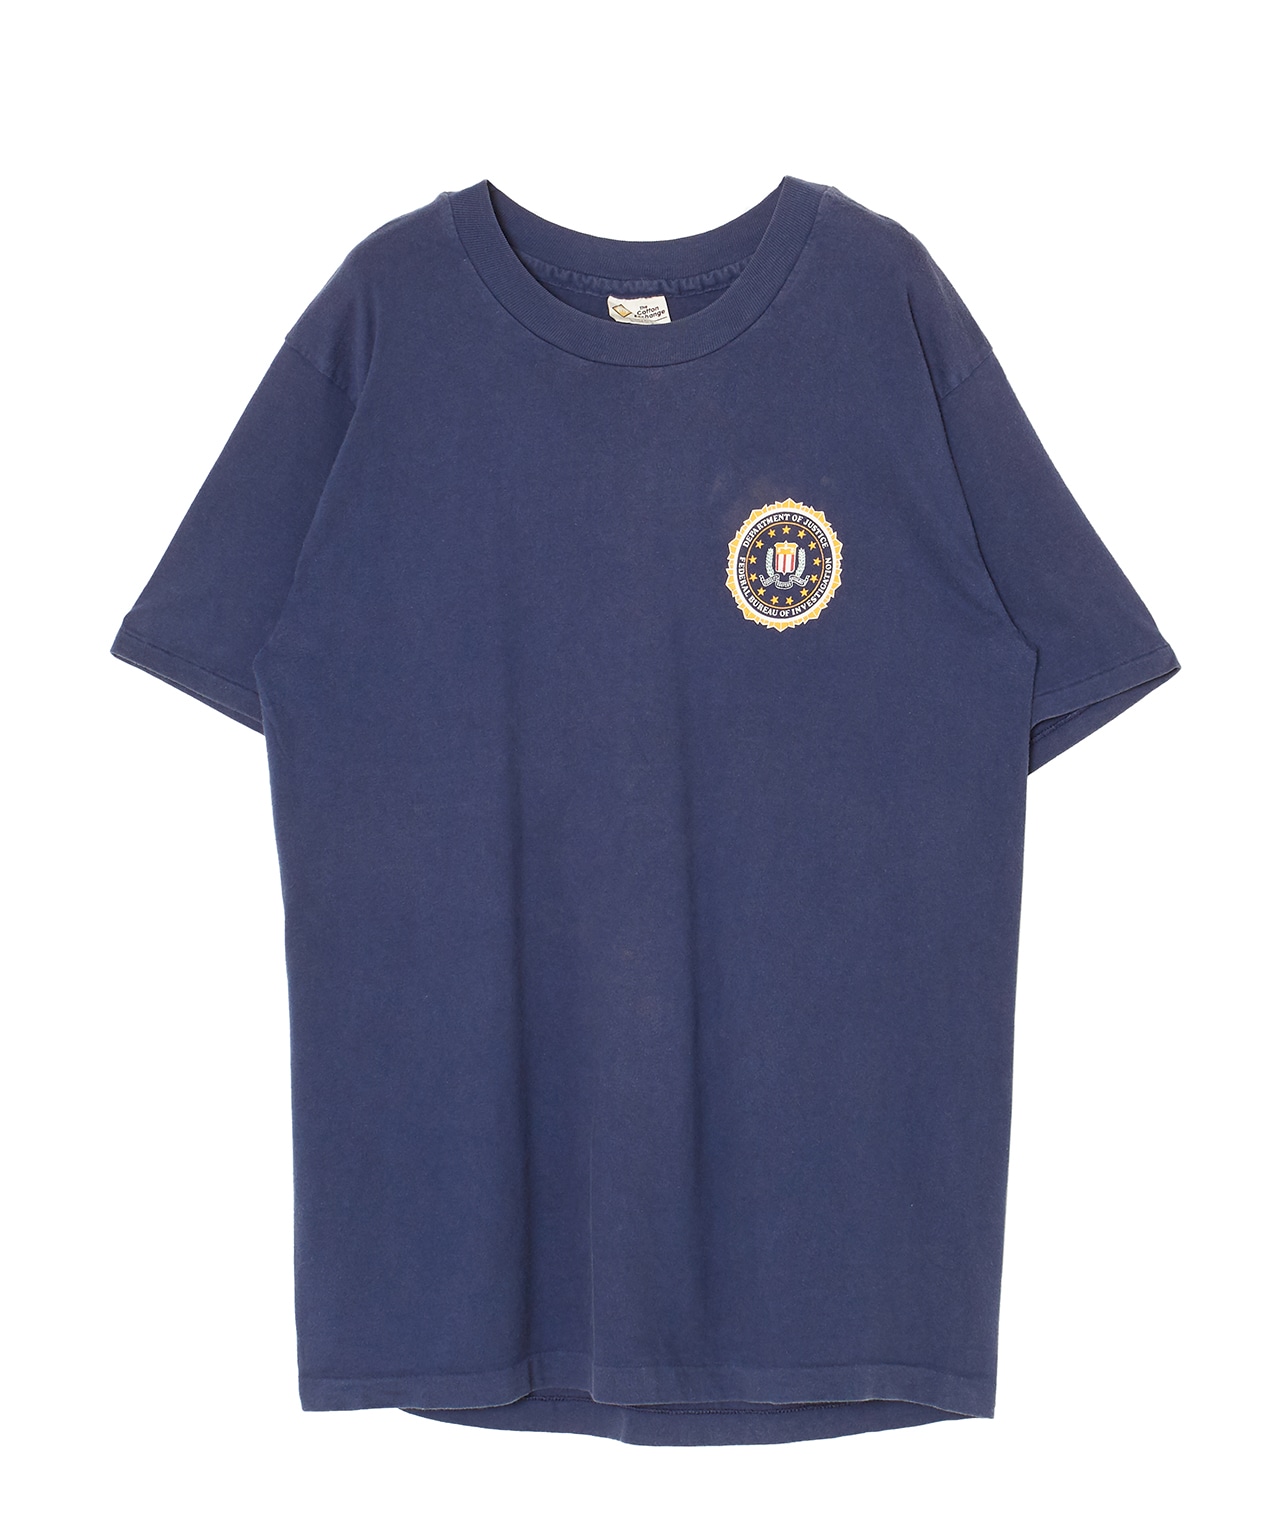 USED/DEPARTMENT OF JUSTICE プリントTシャツ 詳細画像 ネイビー 1